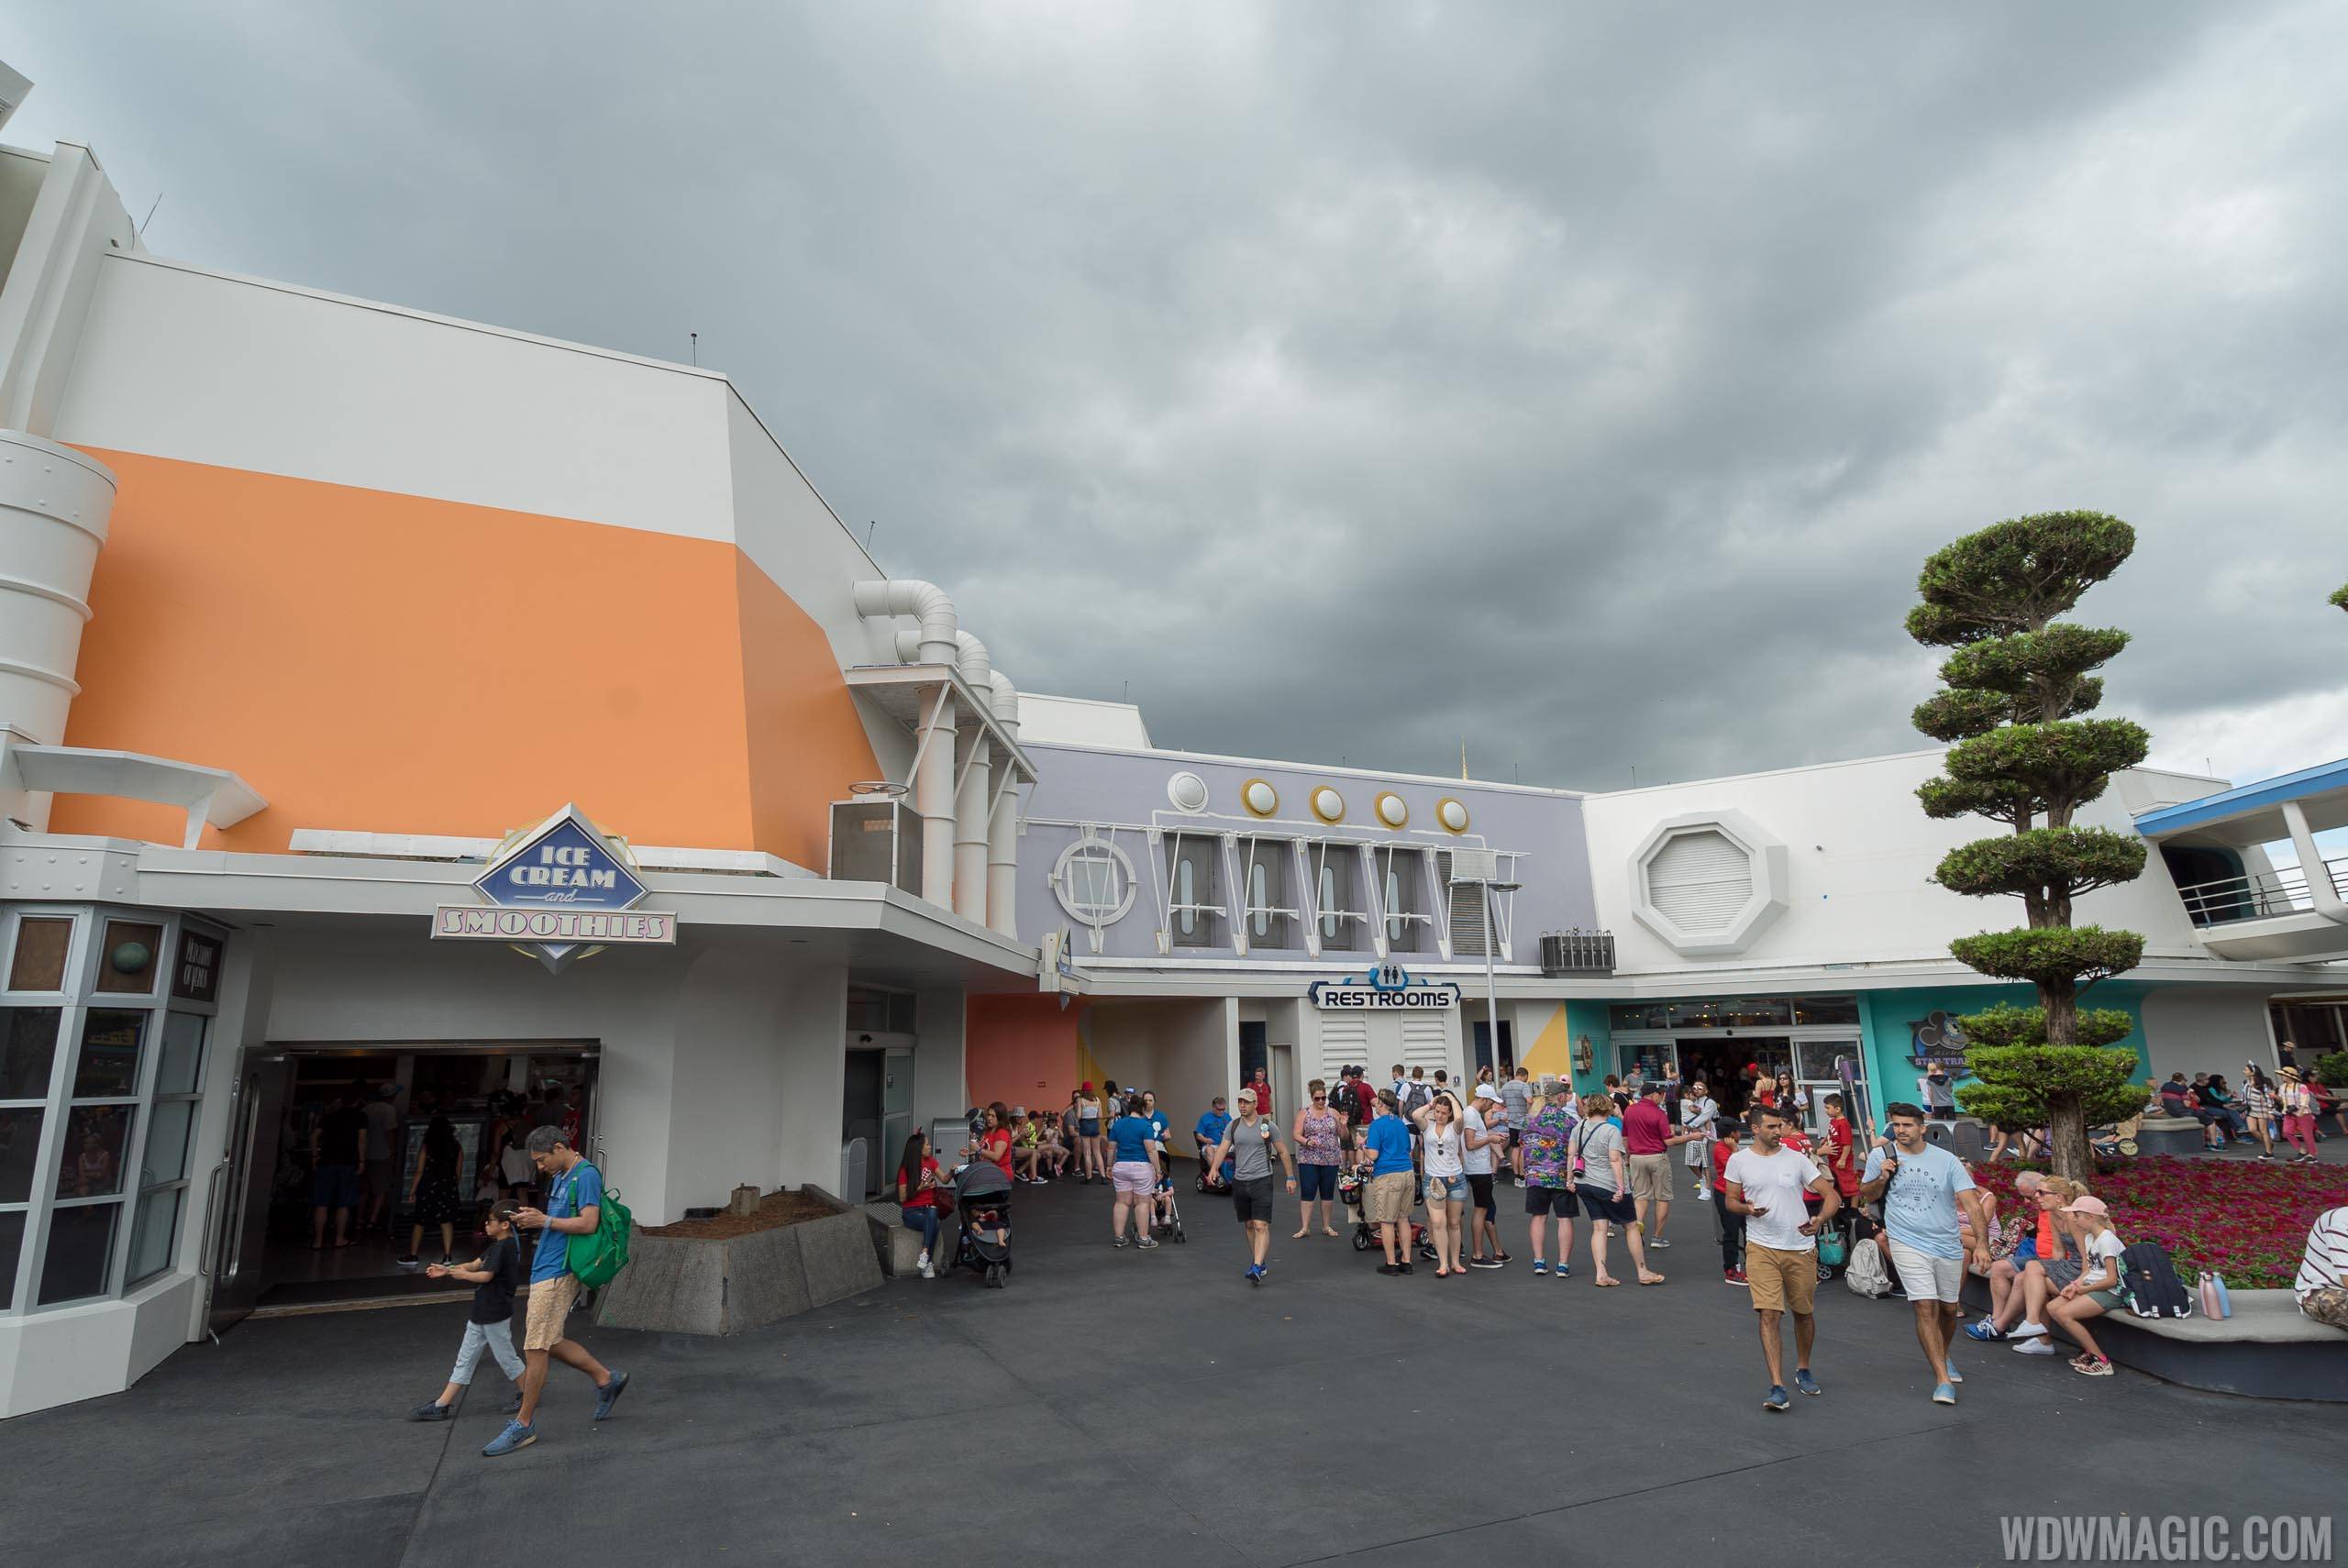 PHOTOS - New color scheme at Tomorrowland continues around the Mickey's Star Traders area